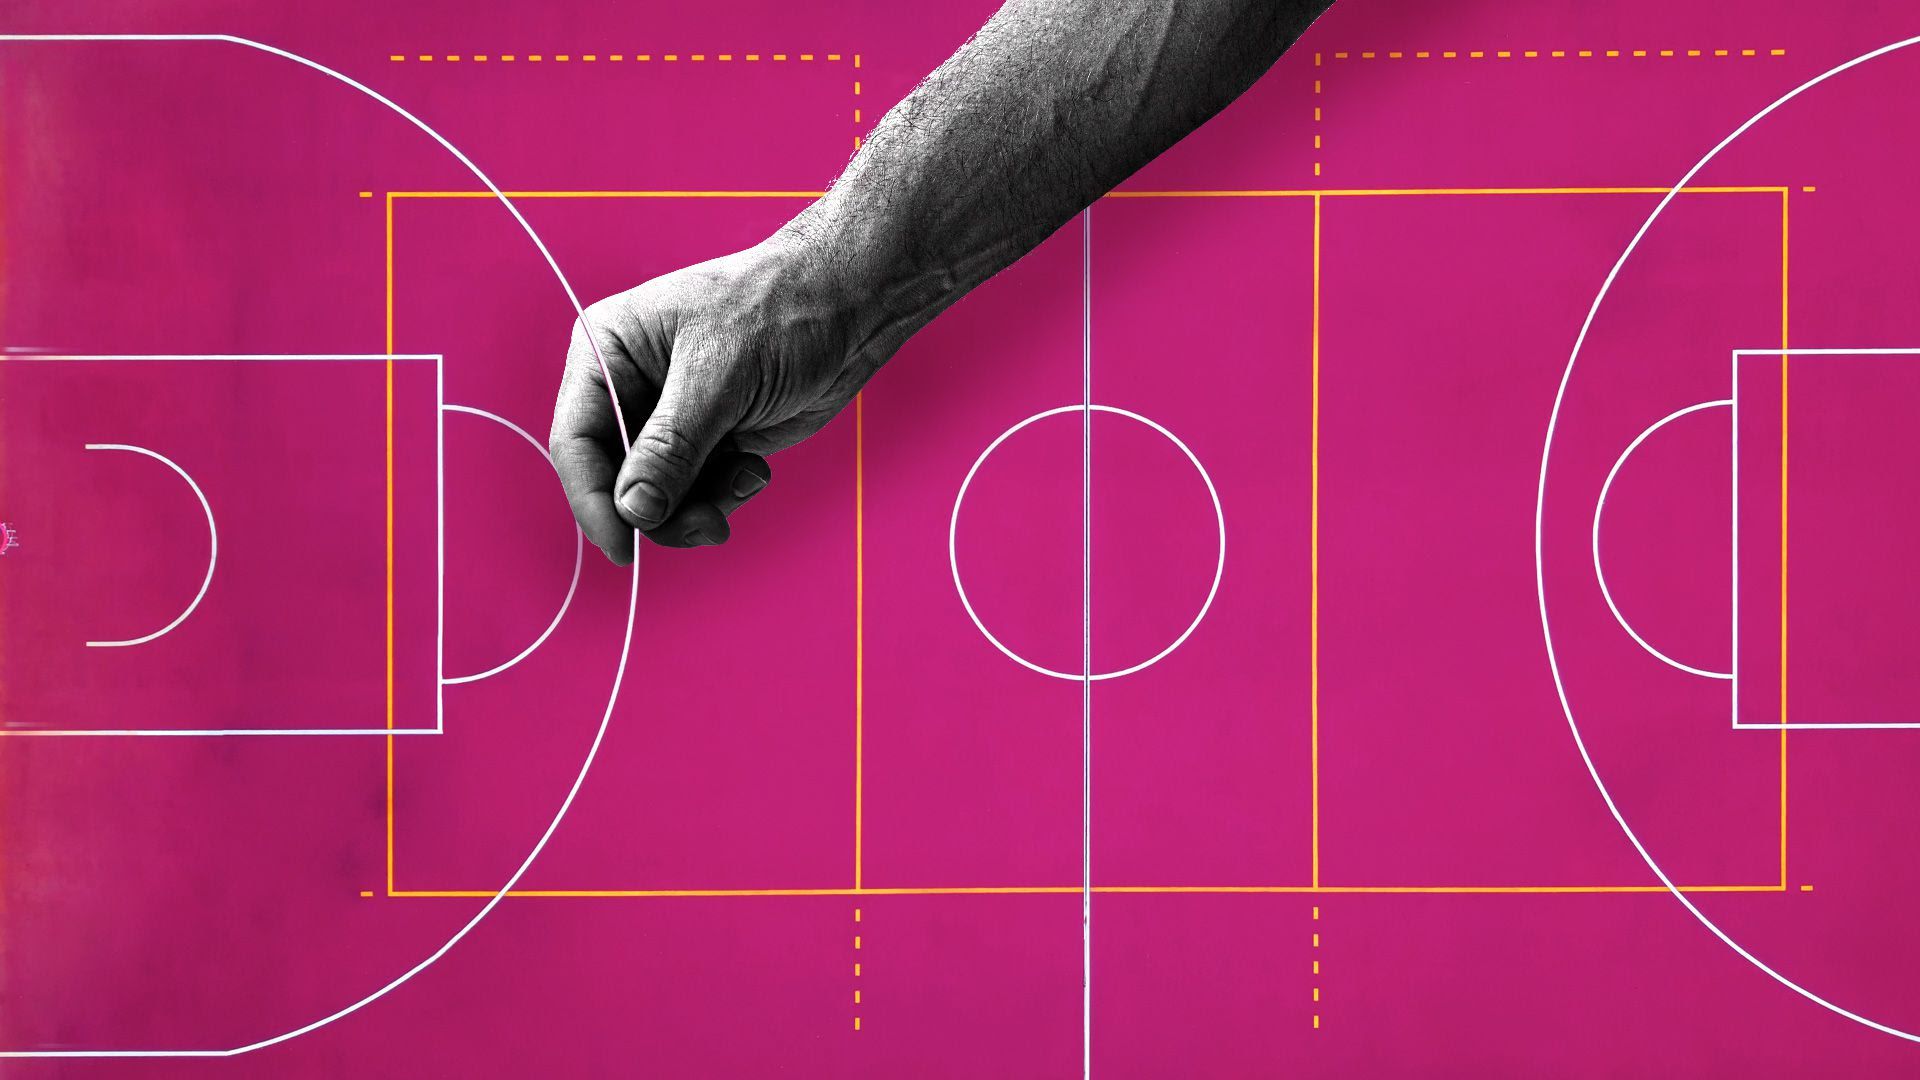 Illustration of a hand moving the 3-point line on a basketball court